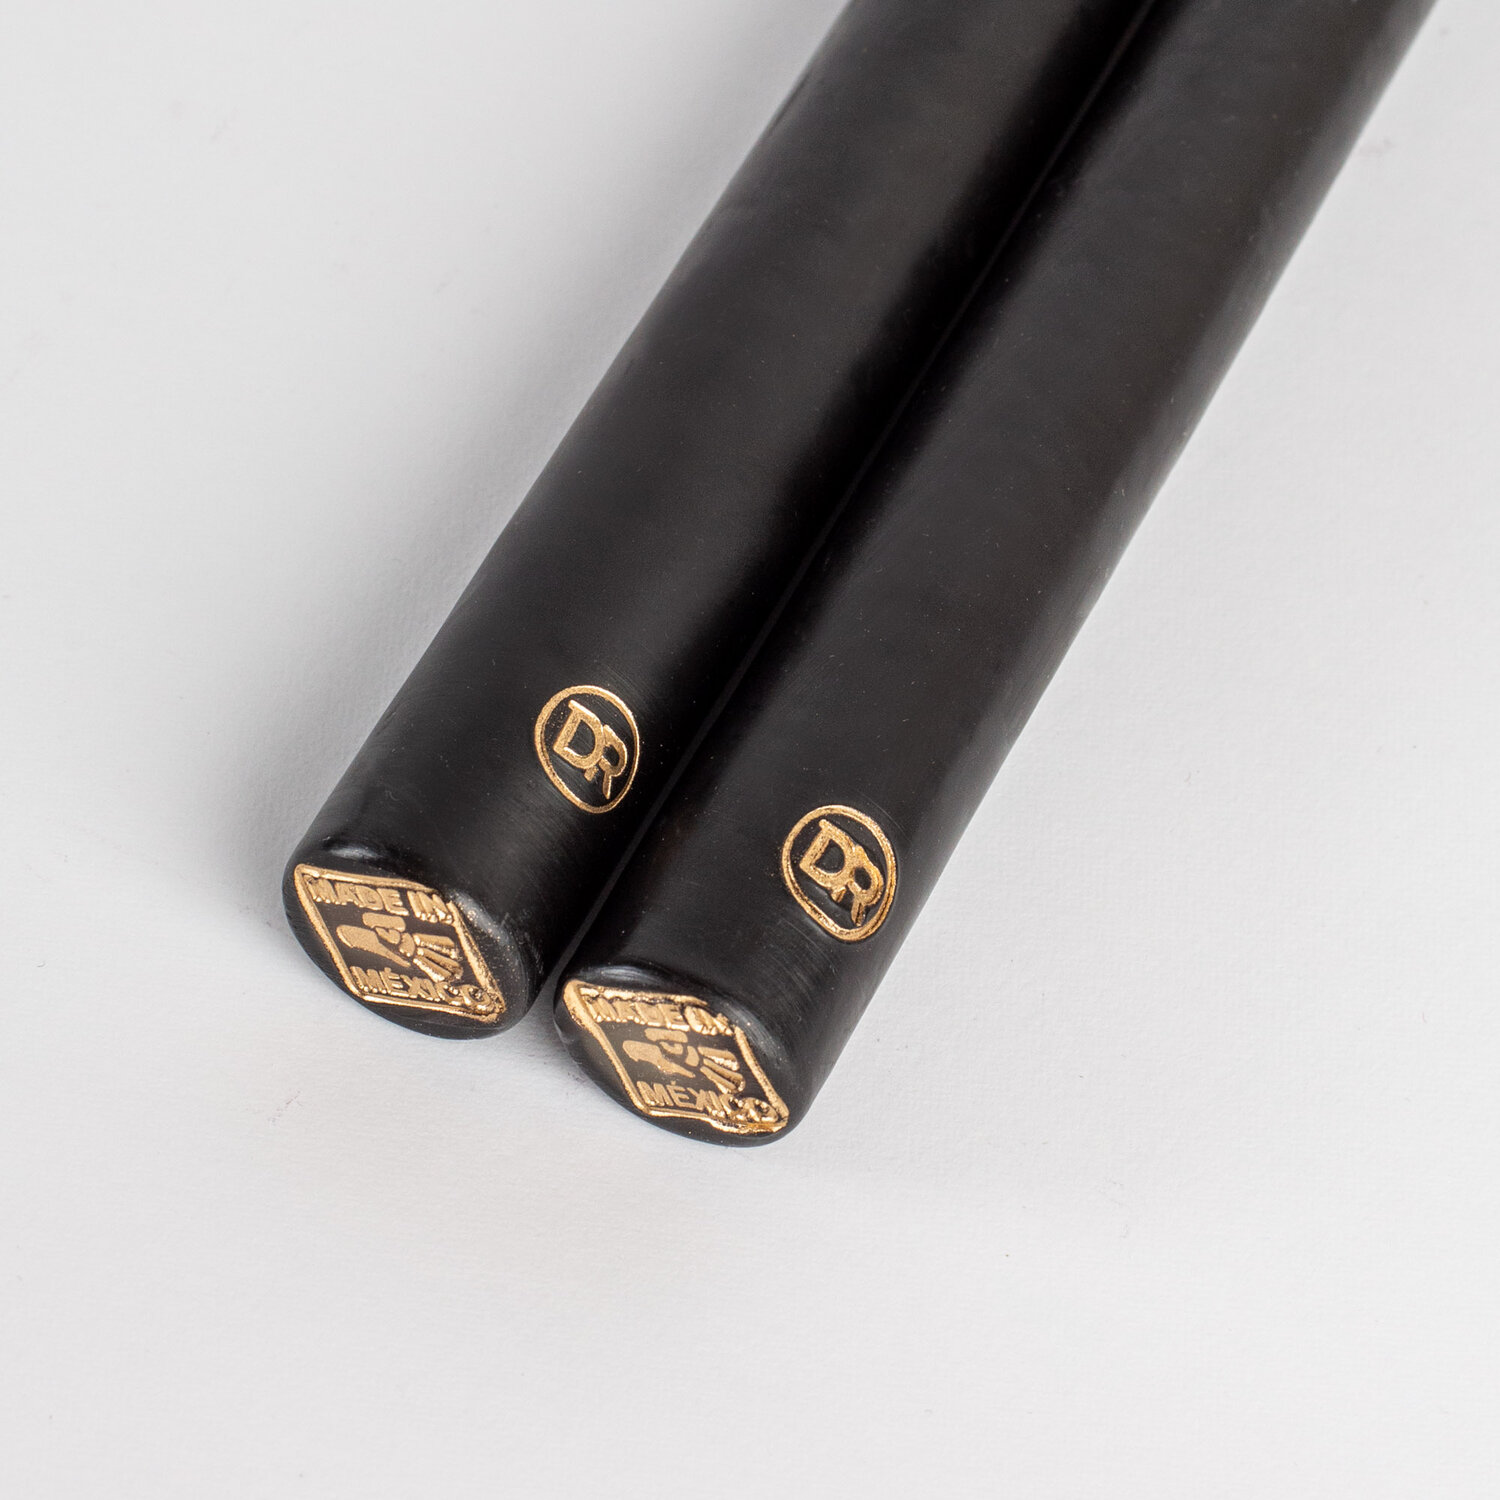 Set of tapers in a black case for professionals